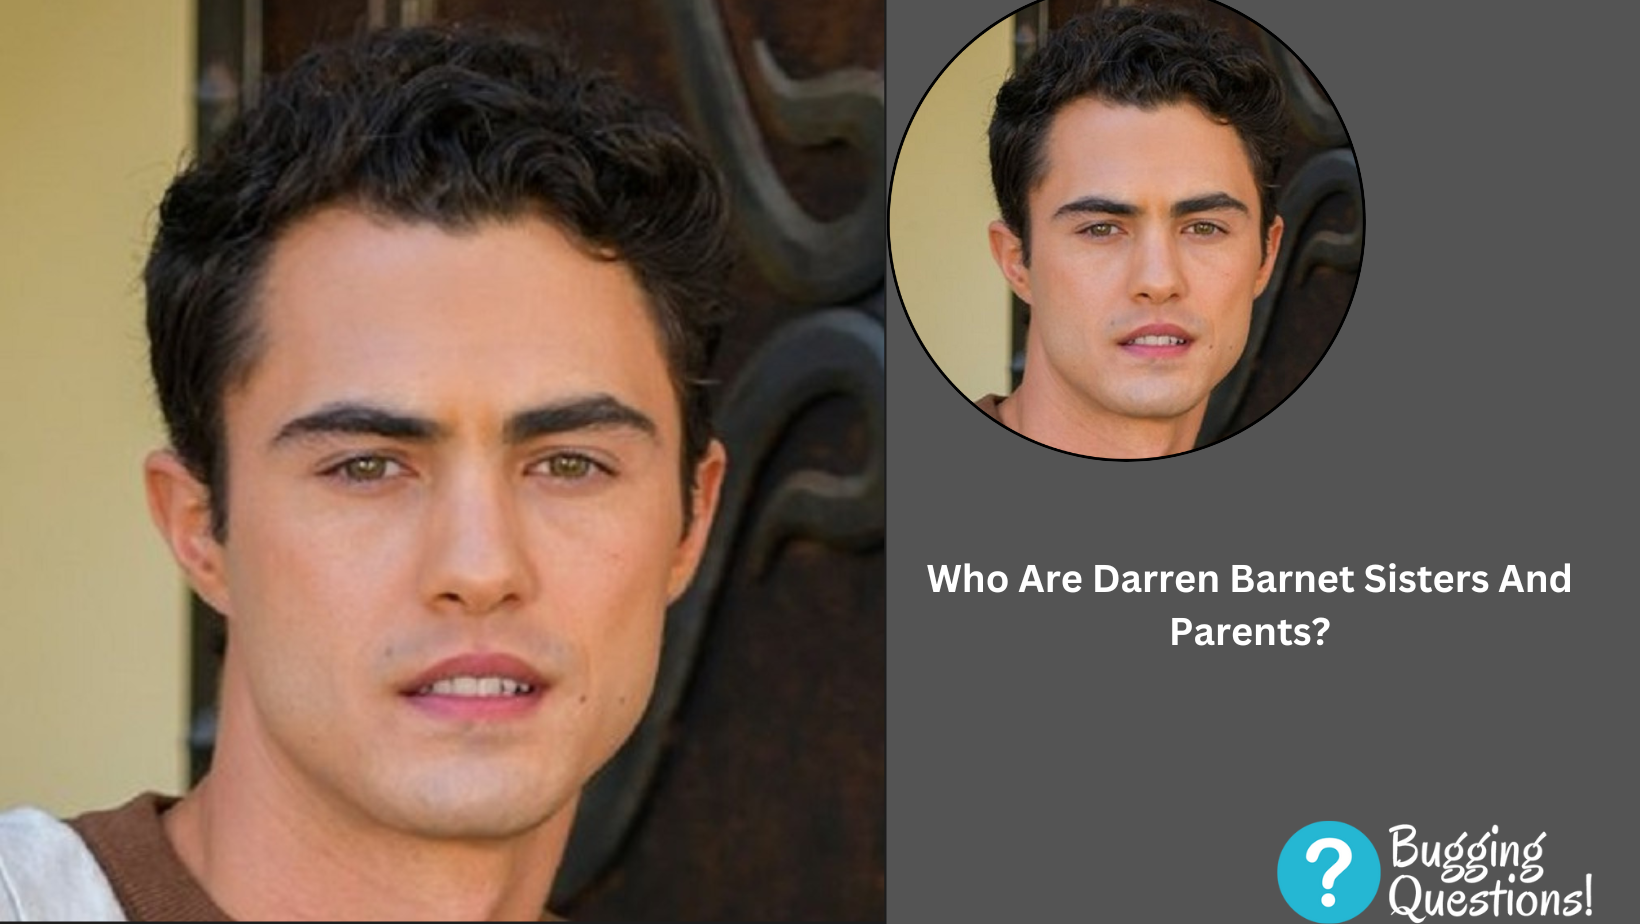 Who Are Darren Barnet Sisters And Parents?